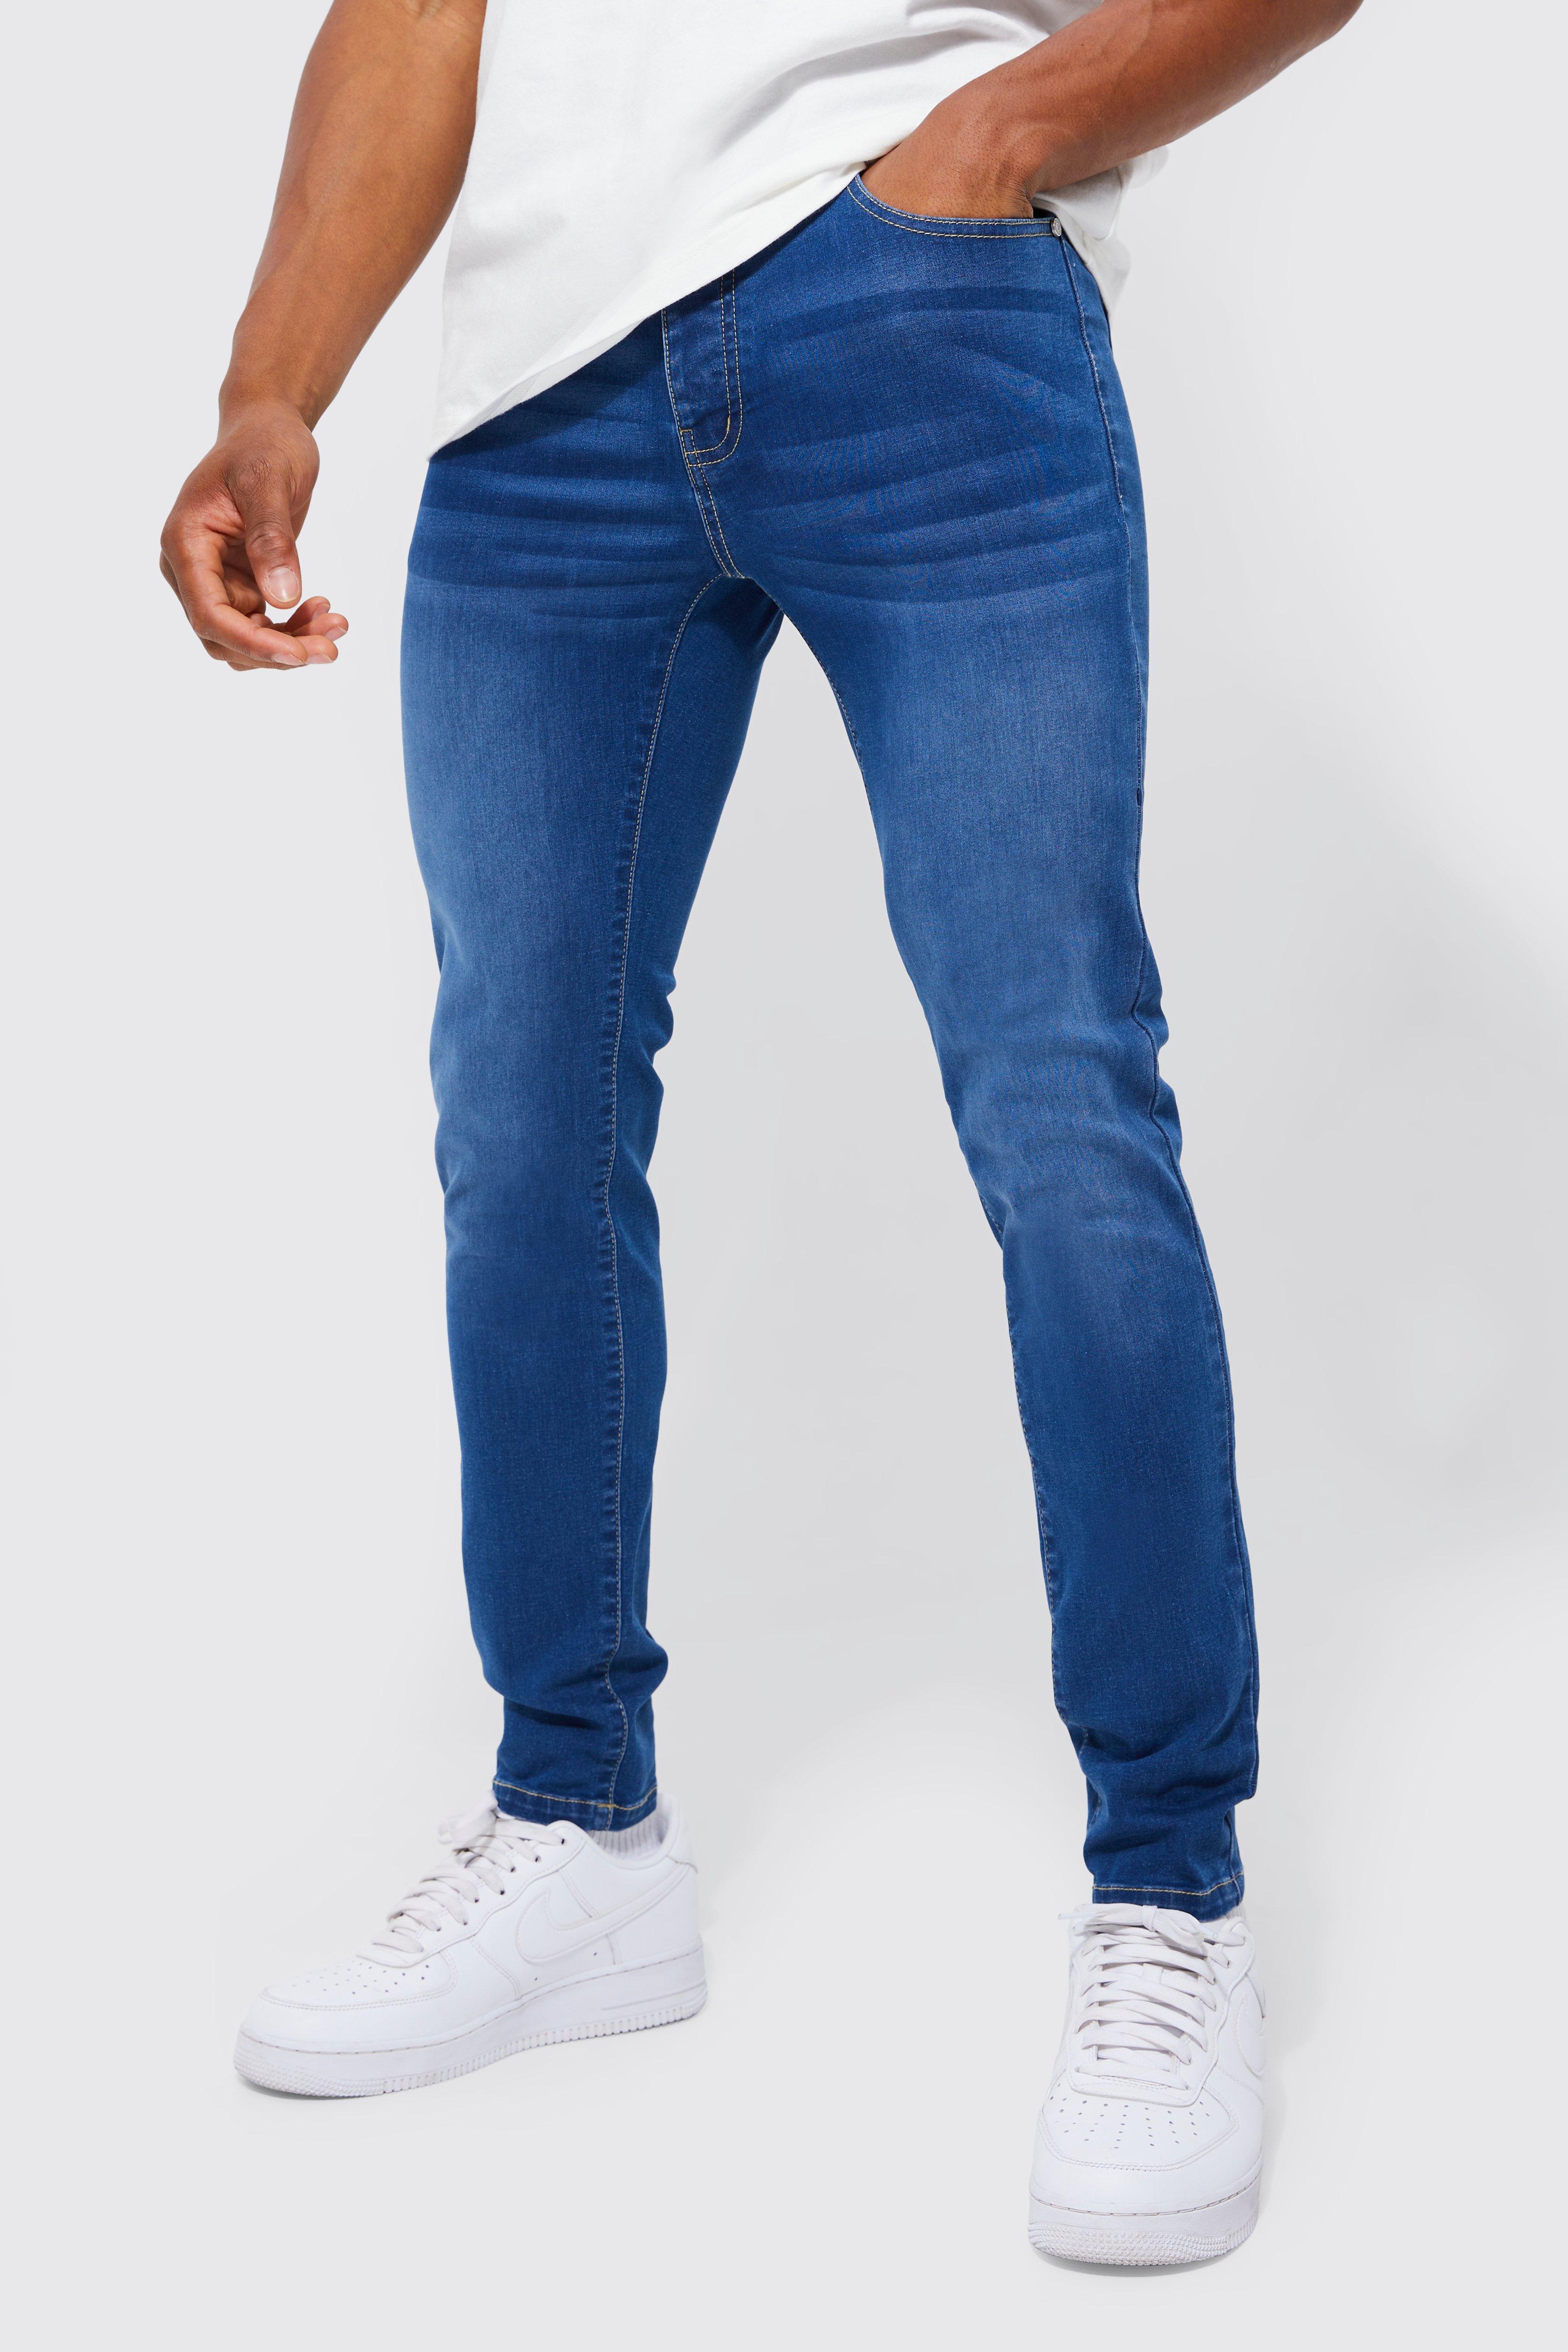 Image of Jeans Stretch Skinny Fit, Azzurro